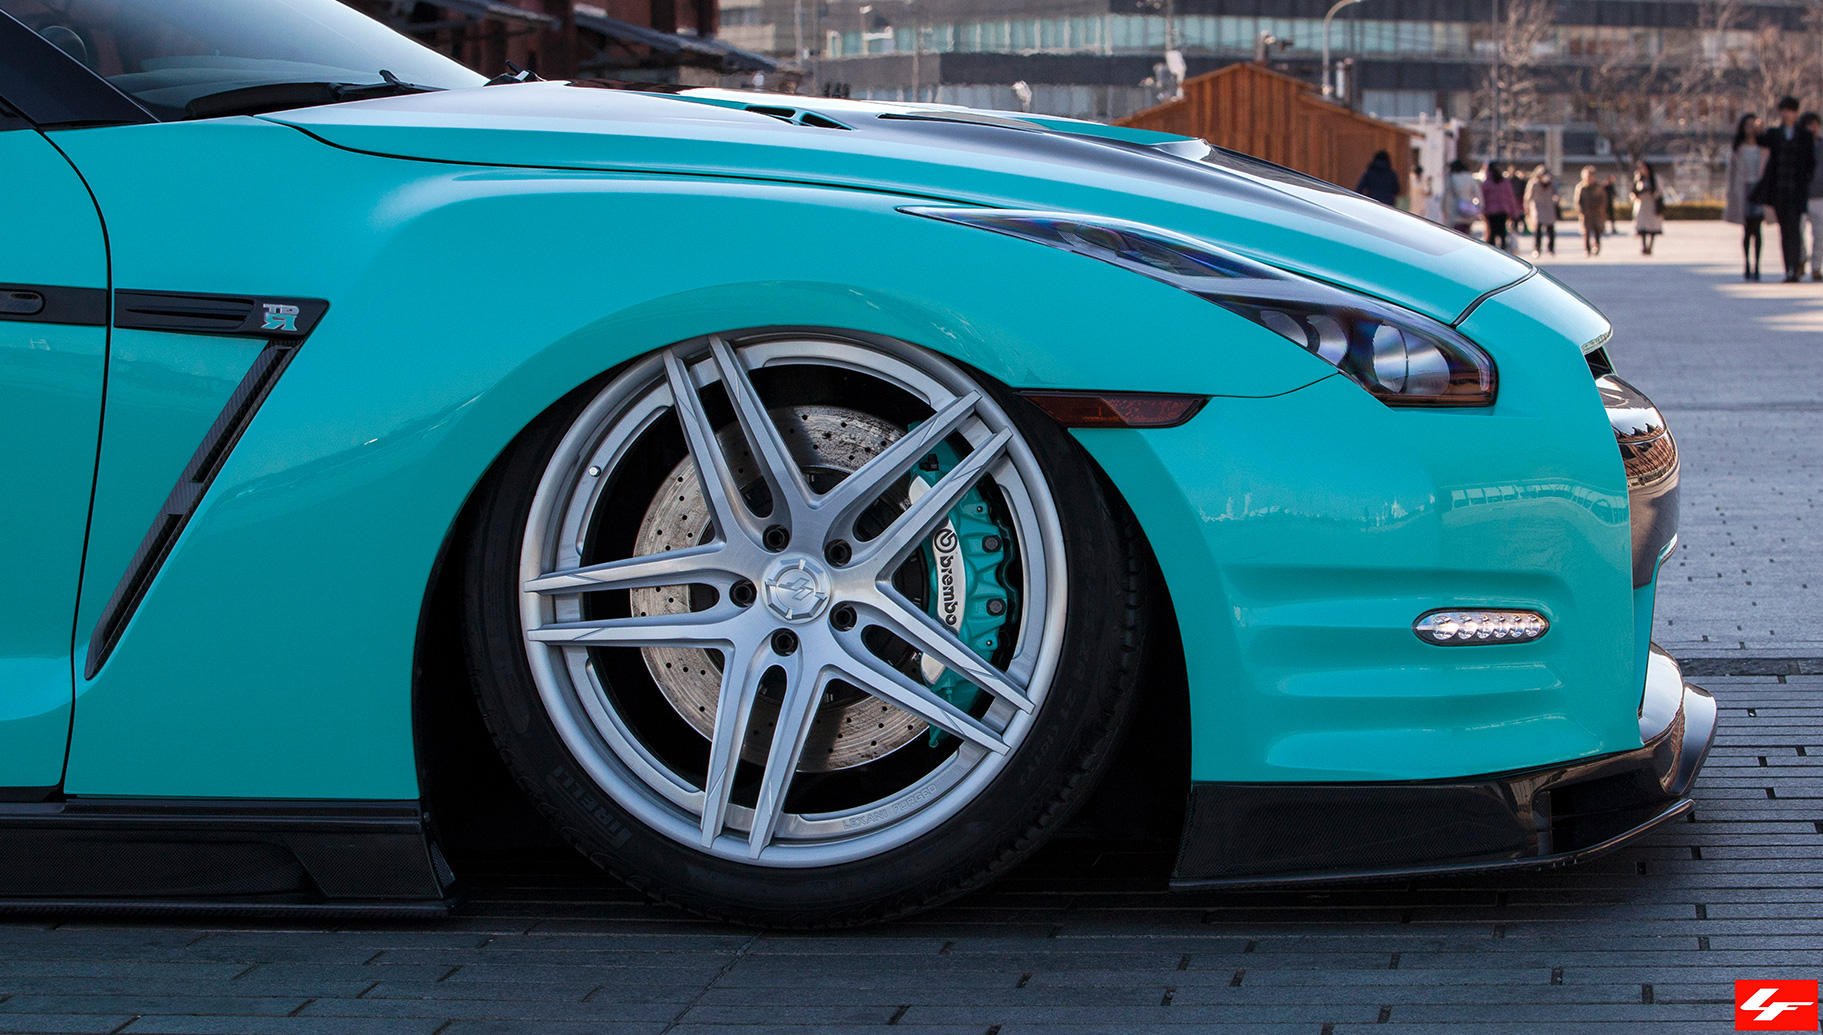 Lexani Brushed Wheels with Brembo Brakes on Mint Green Nissan GT-R - Photo by Lexani